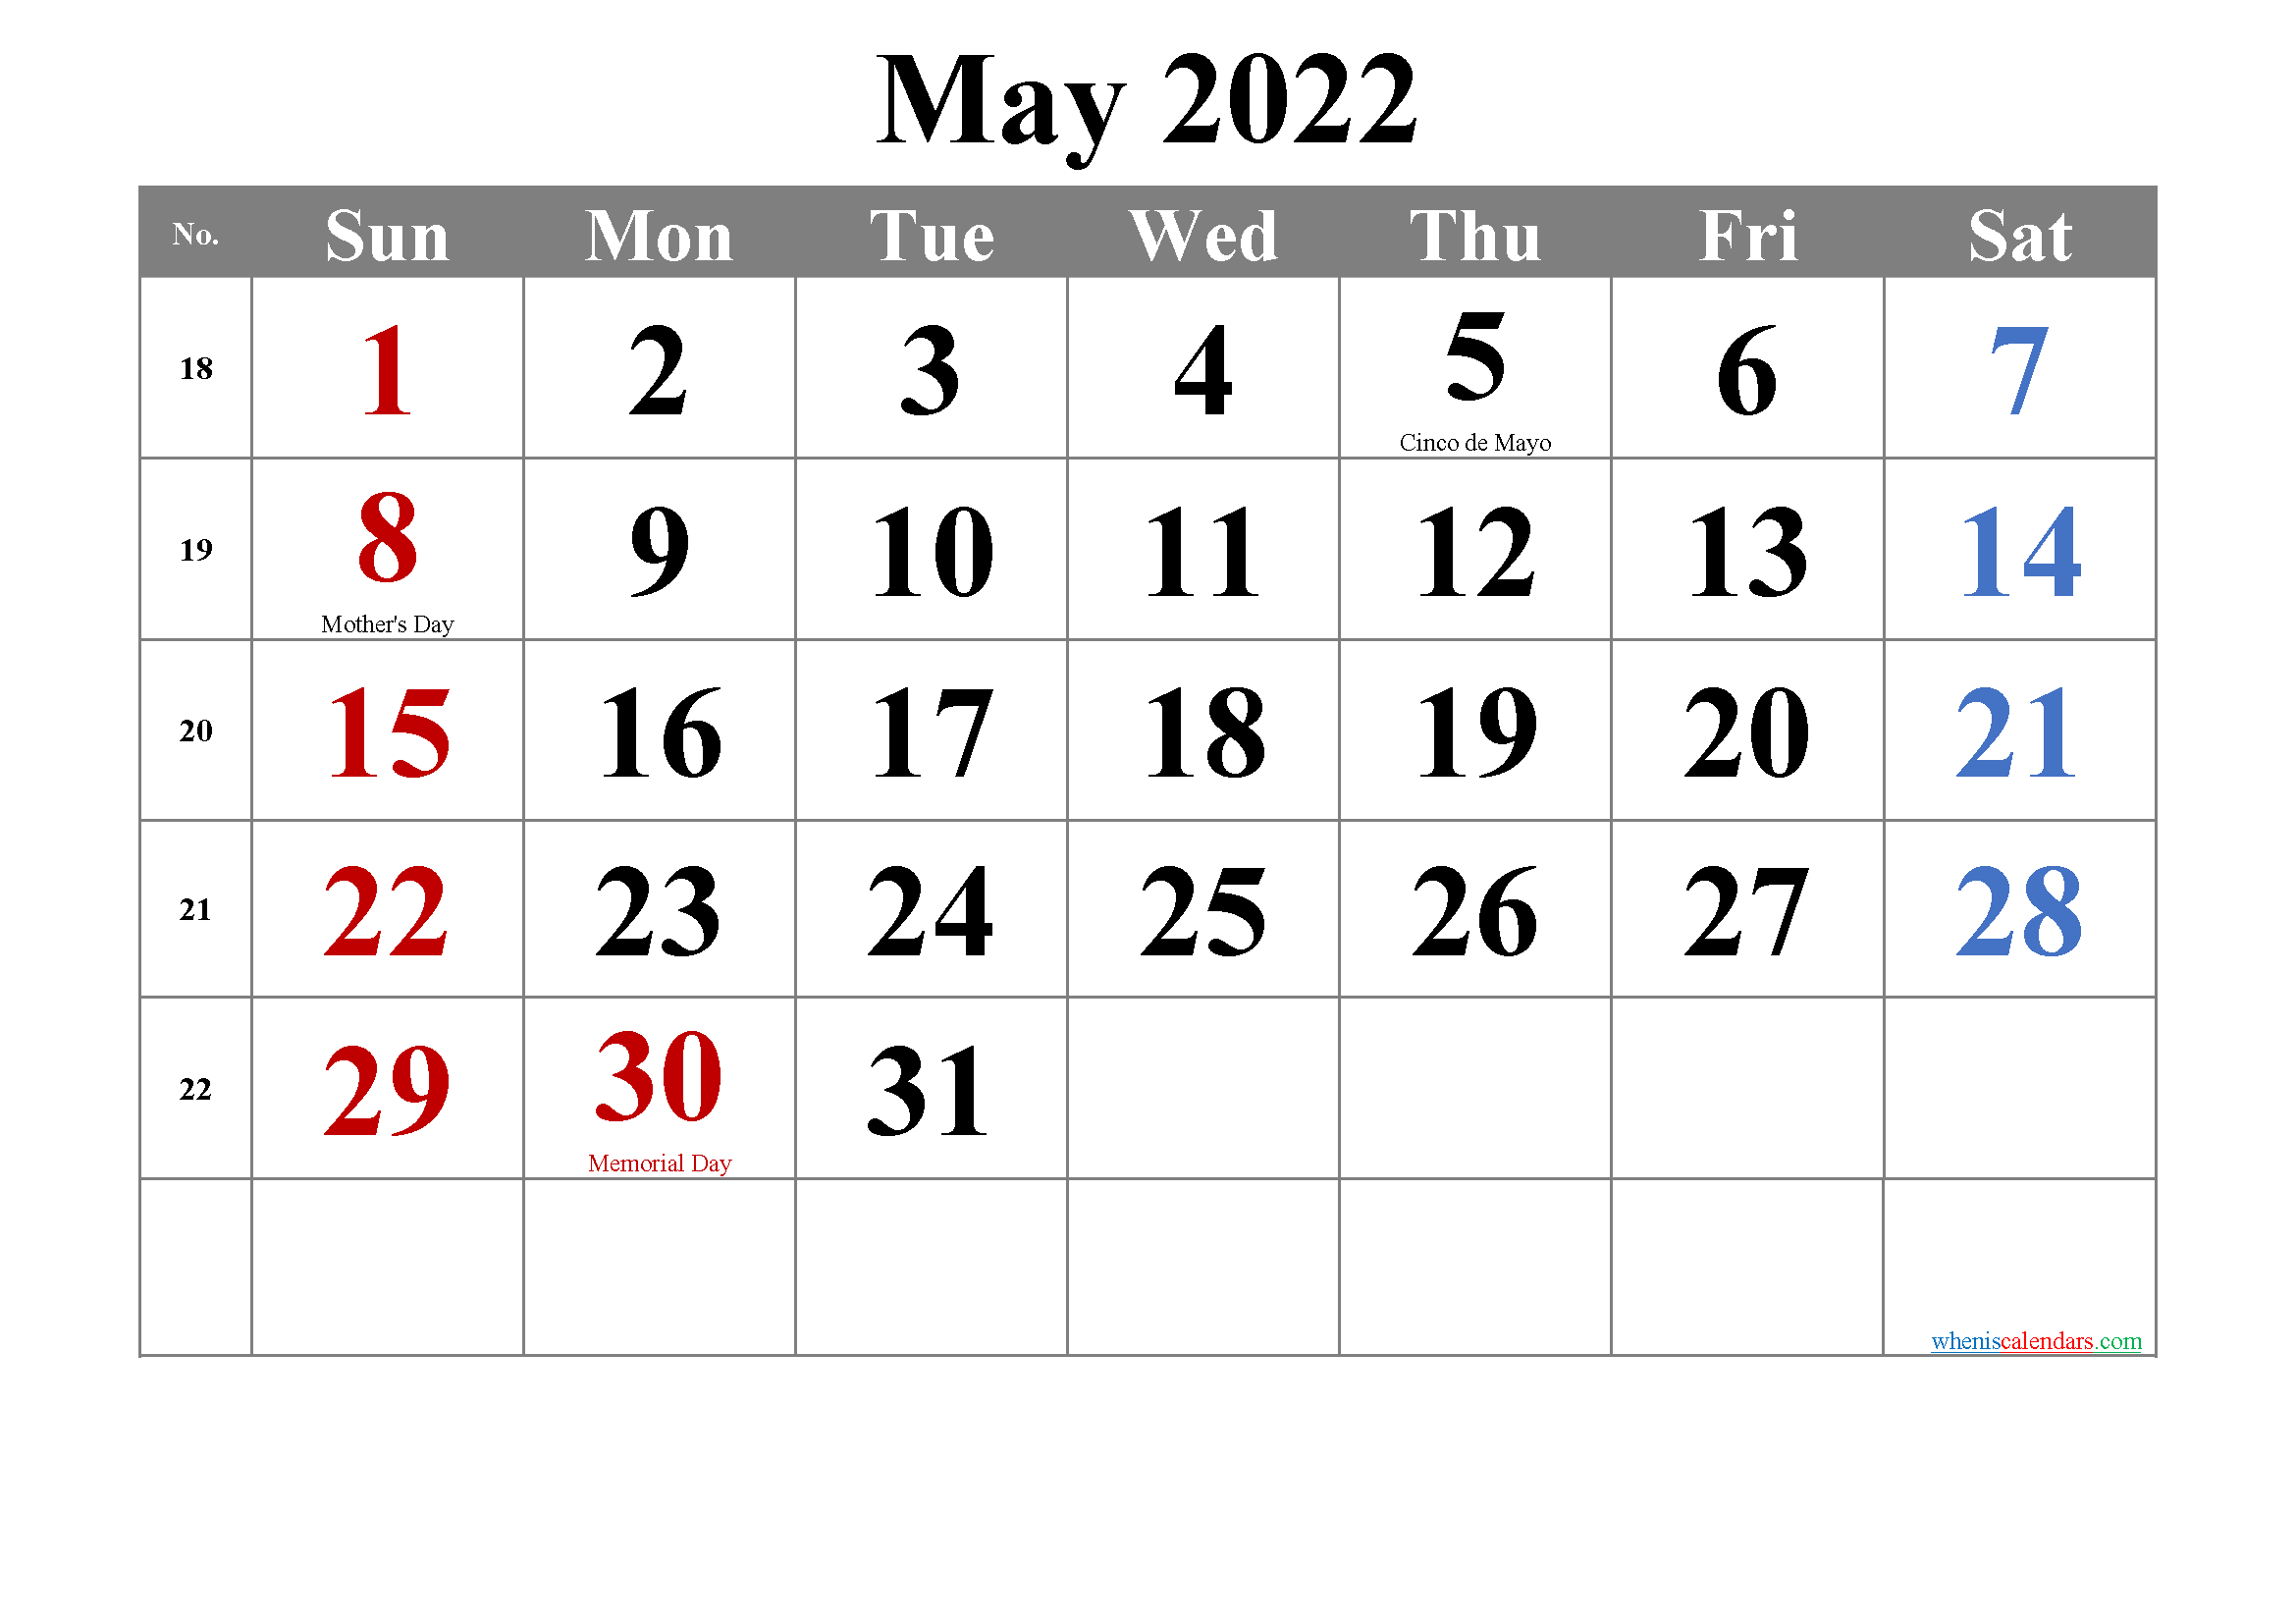 May Calendar 2022 With Holidays May 2022 Calendar With Holidays Printable-Template No.tr22M5